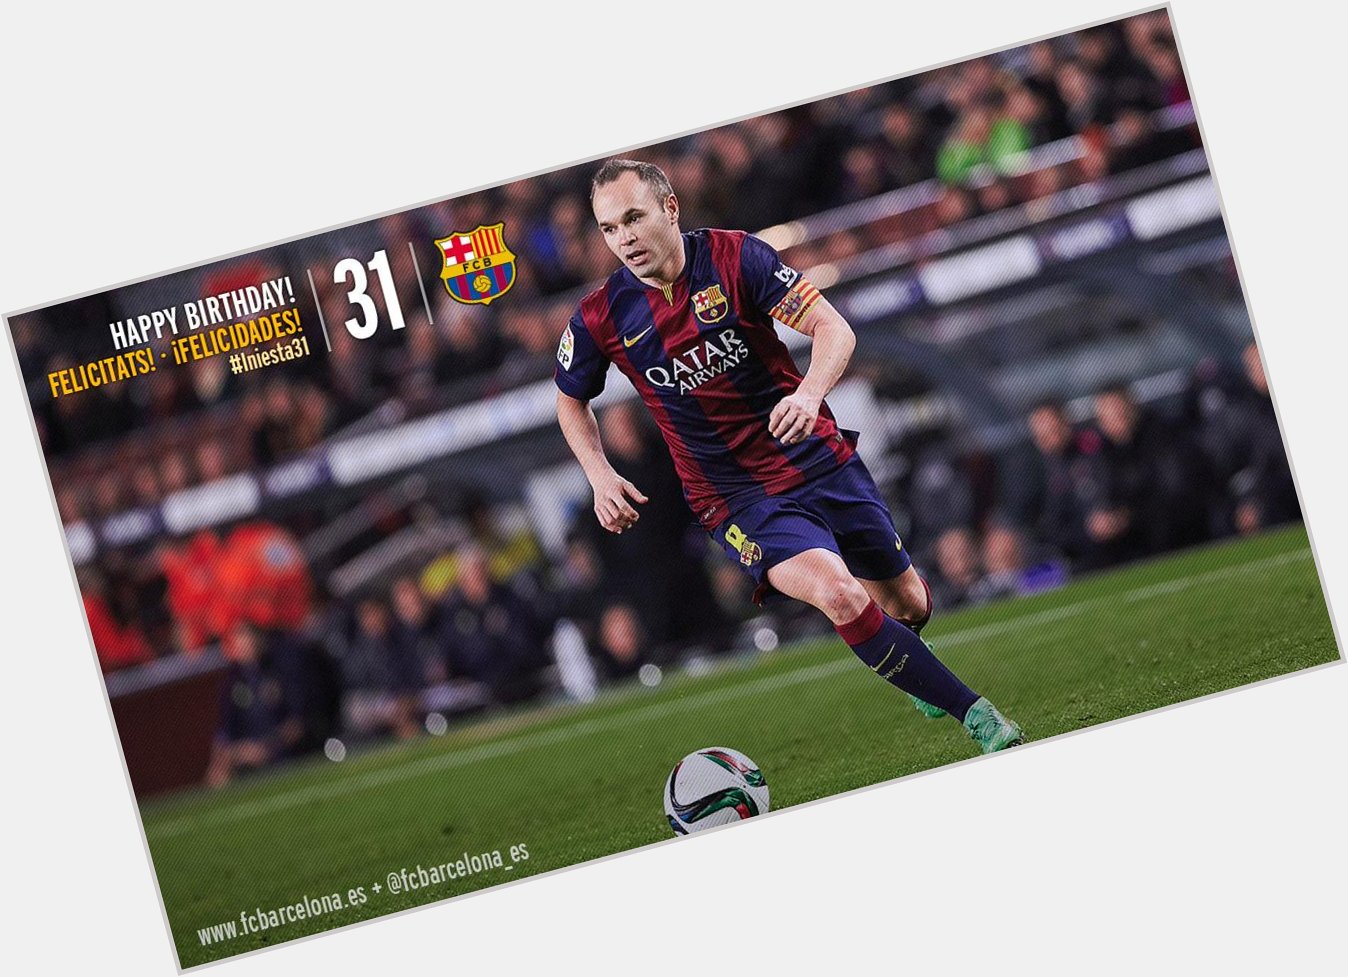 Happy birthday to Andres Iniesta,,
All the best on you   